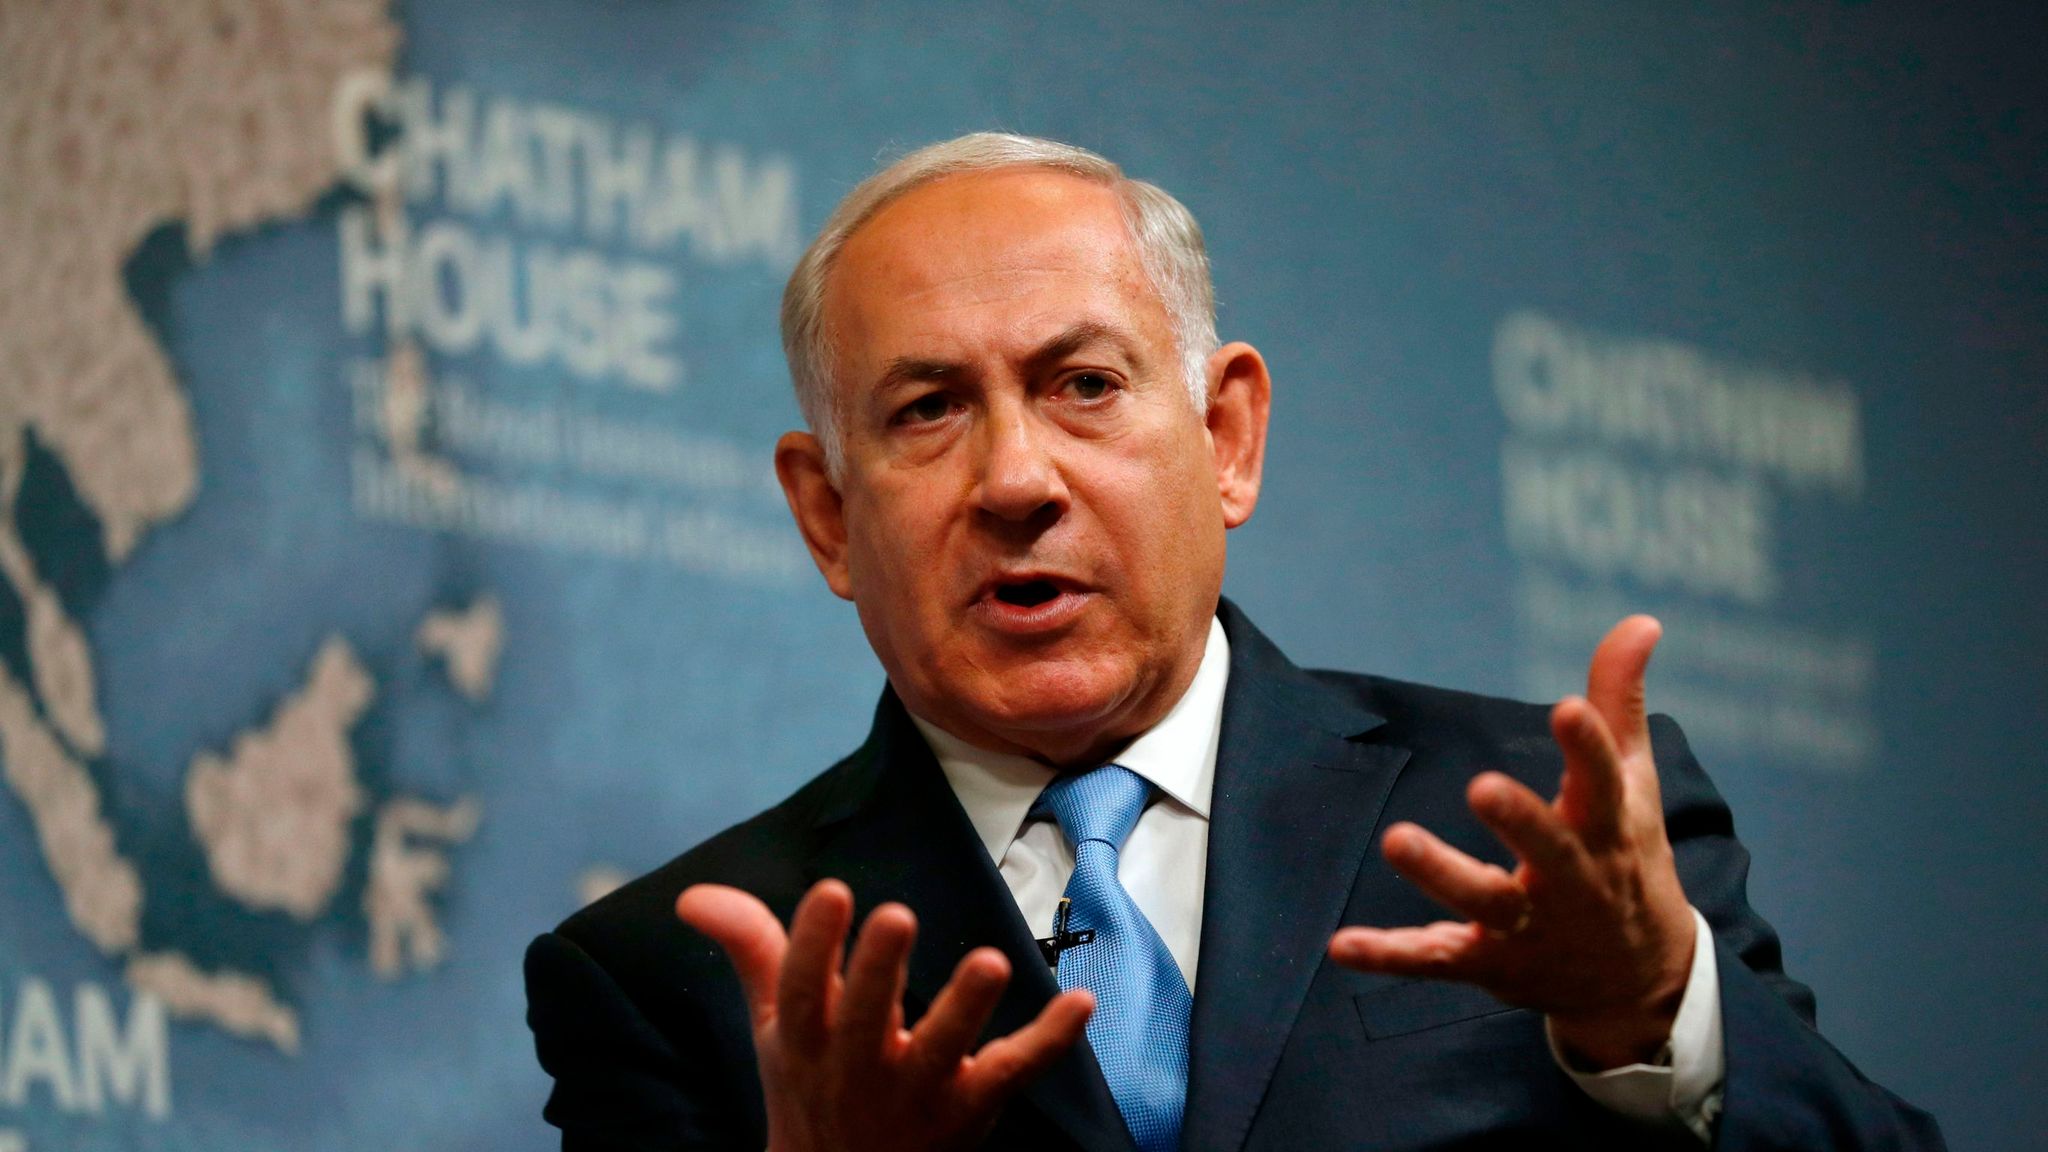 netanyahu-changed-the-way-americans-view-israel-but-not-always-in-the